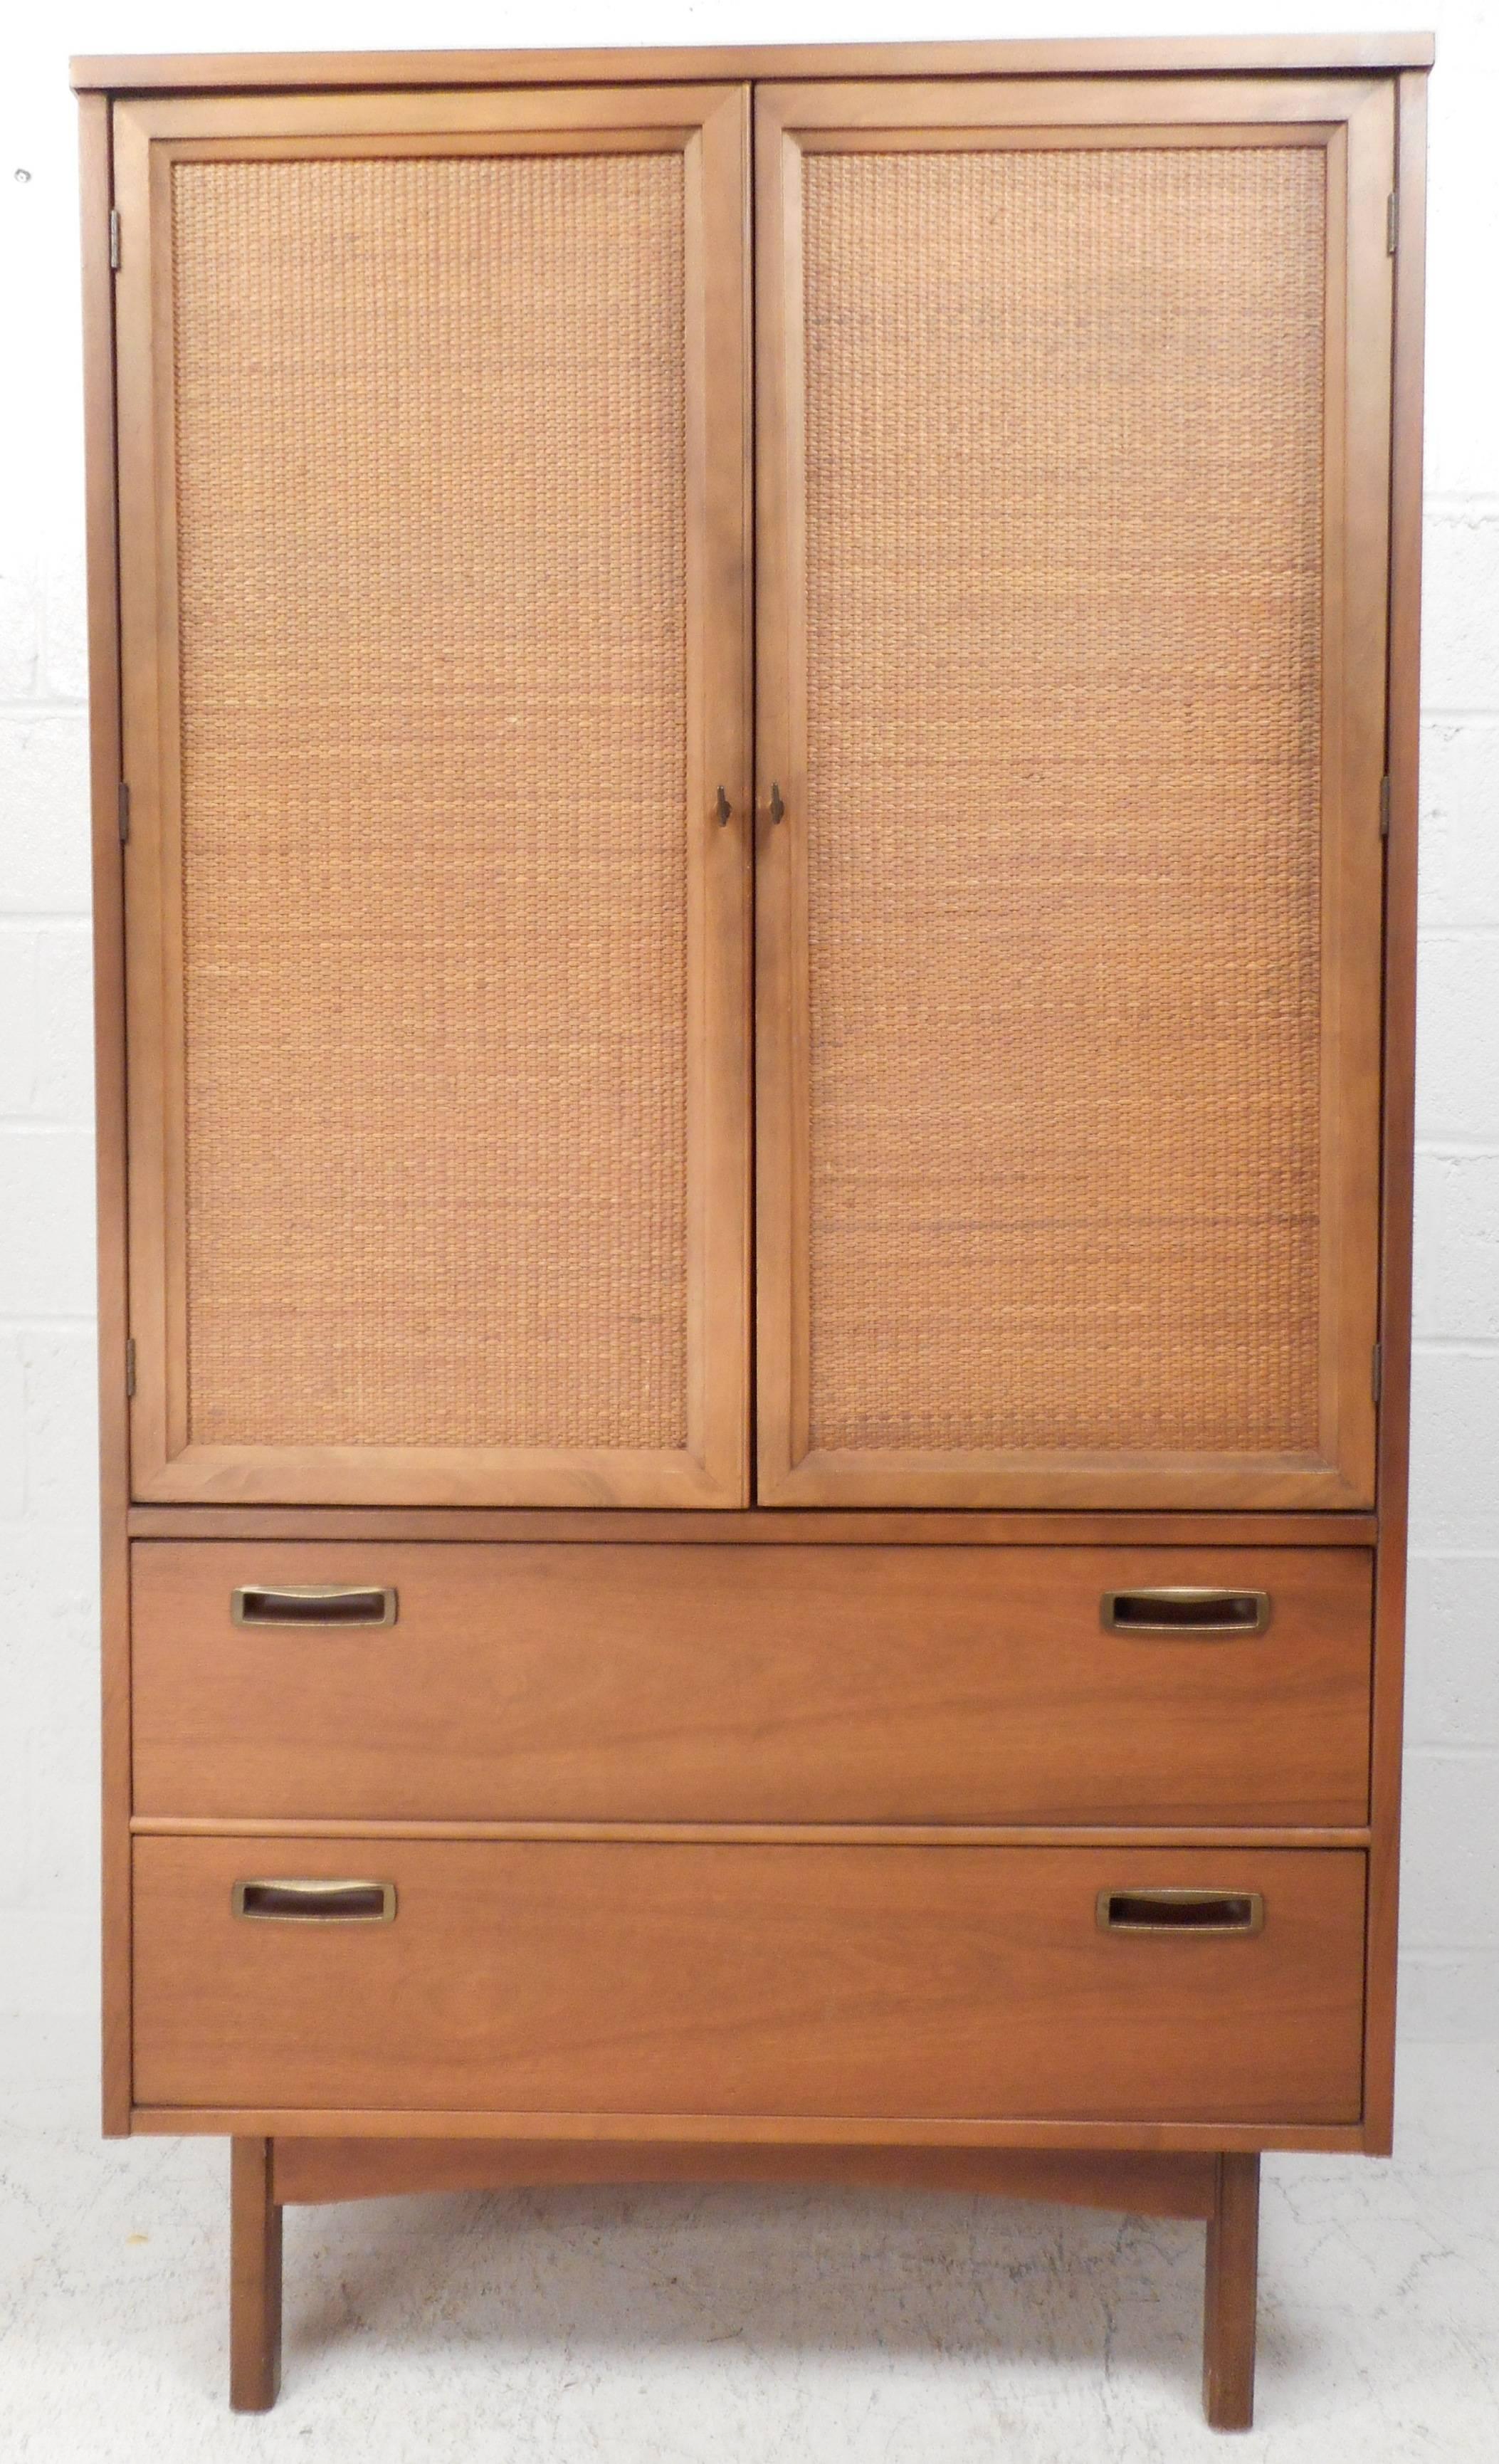 Impressive vintage modern wardrobe with stylish cane front cabinets, sculpted brass pulls, and vintage walnut finish. Two large drawers, three small drawers, and four shelves offer ample storage in any modern interior. Please confirm item location